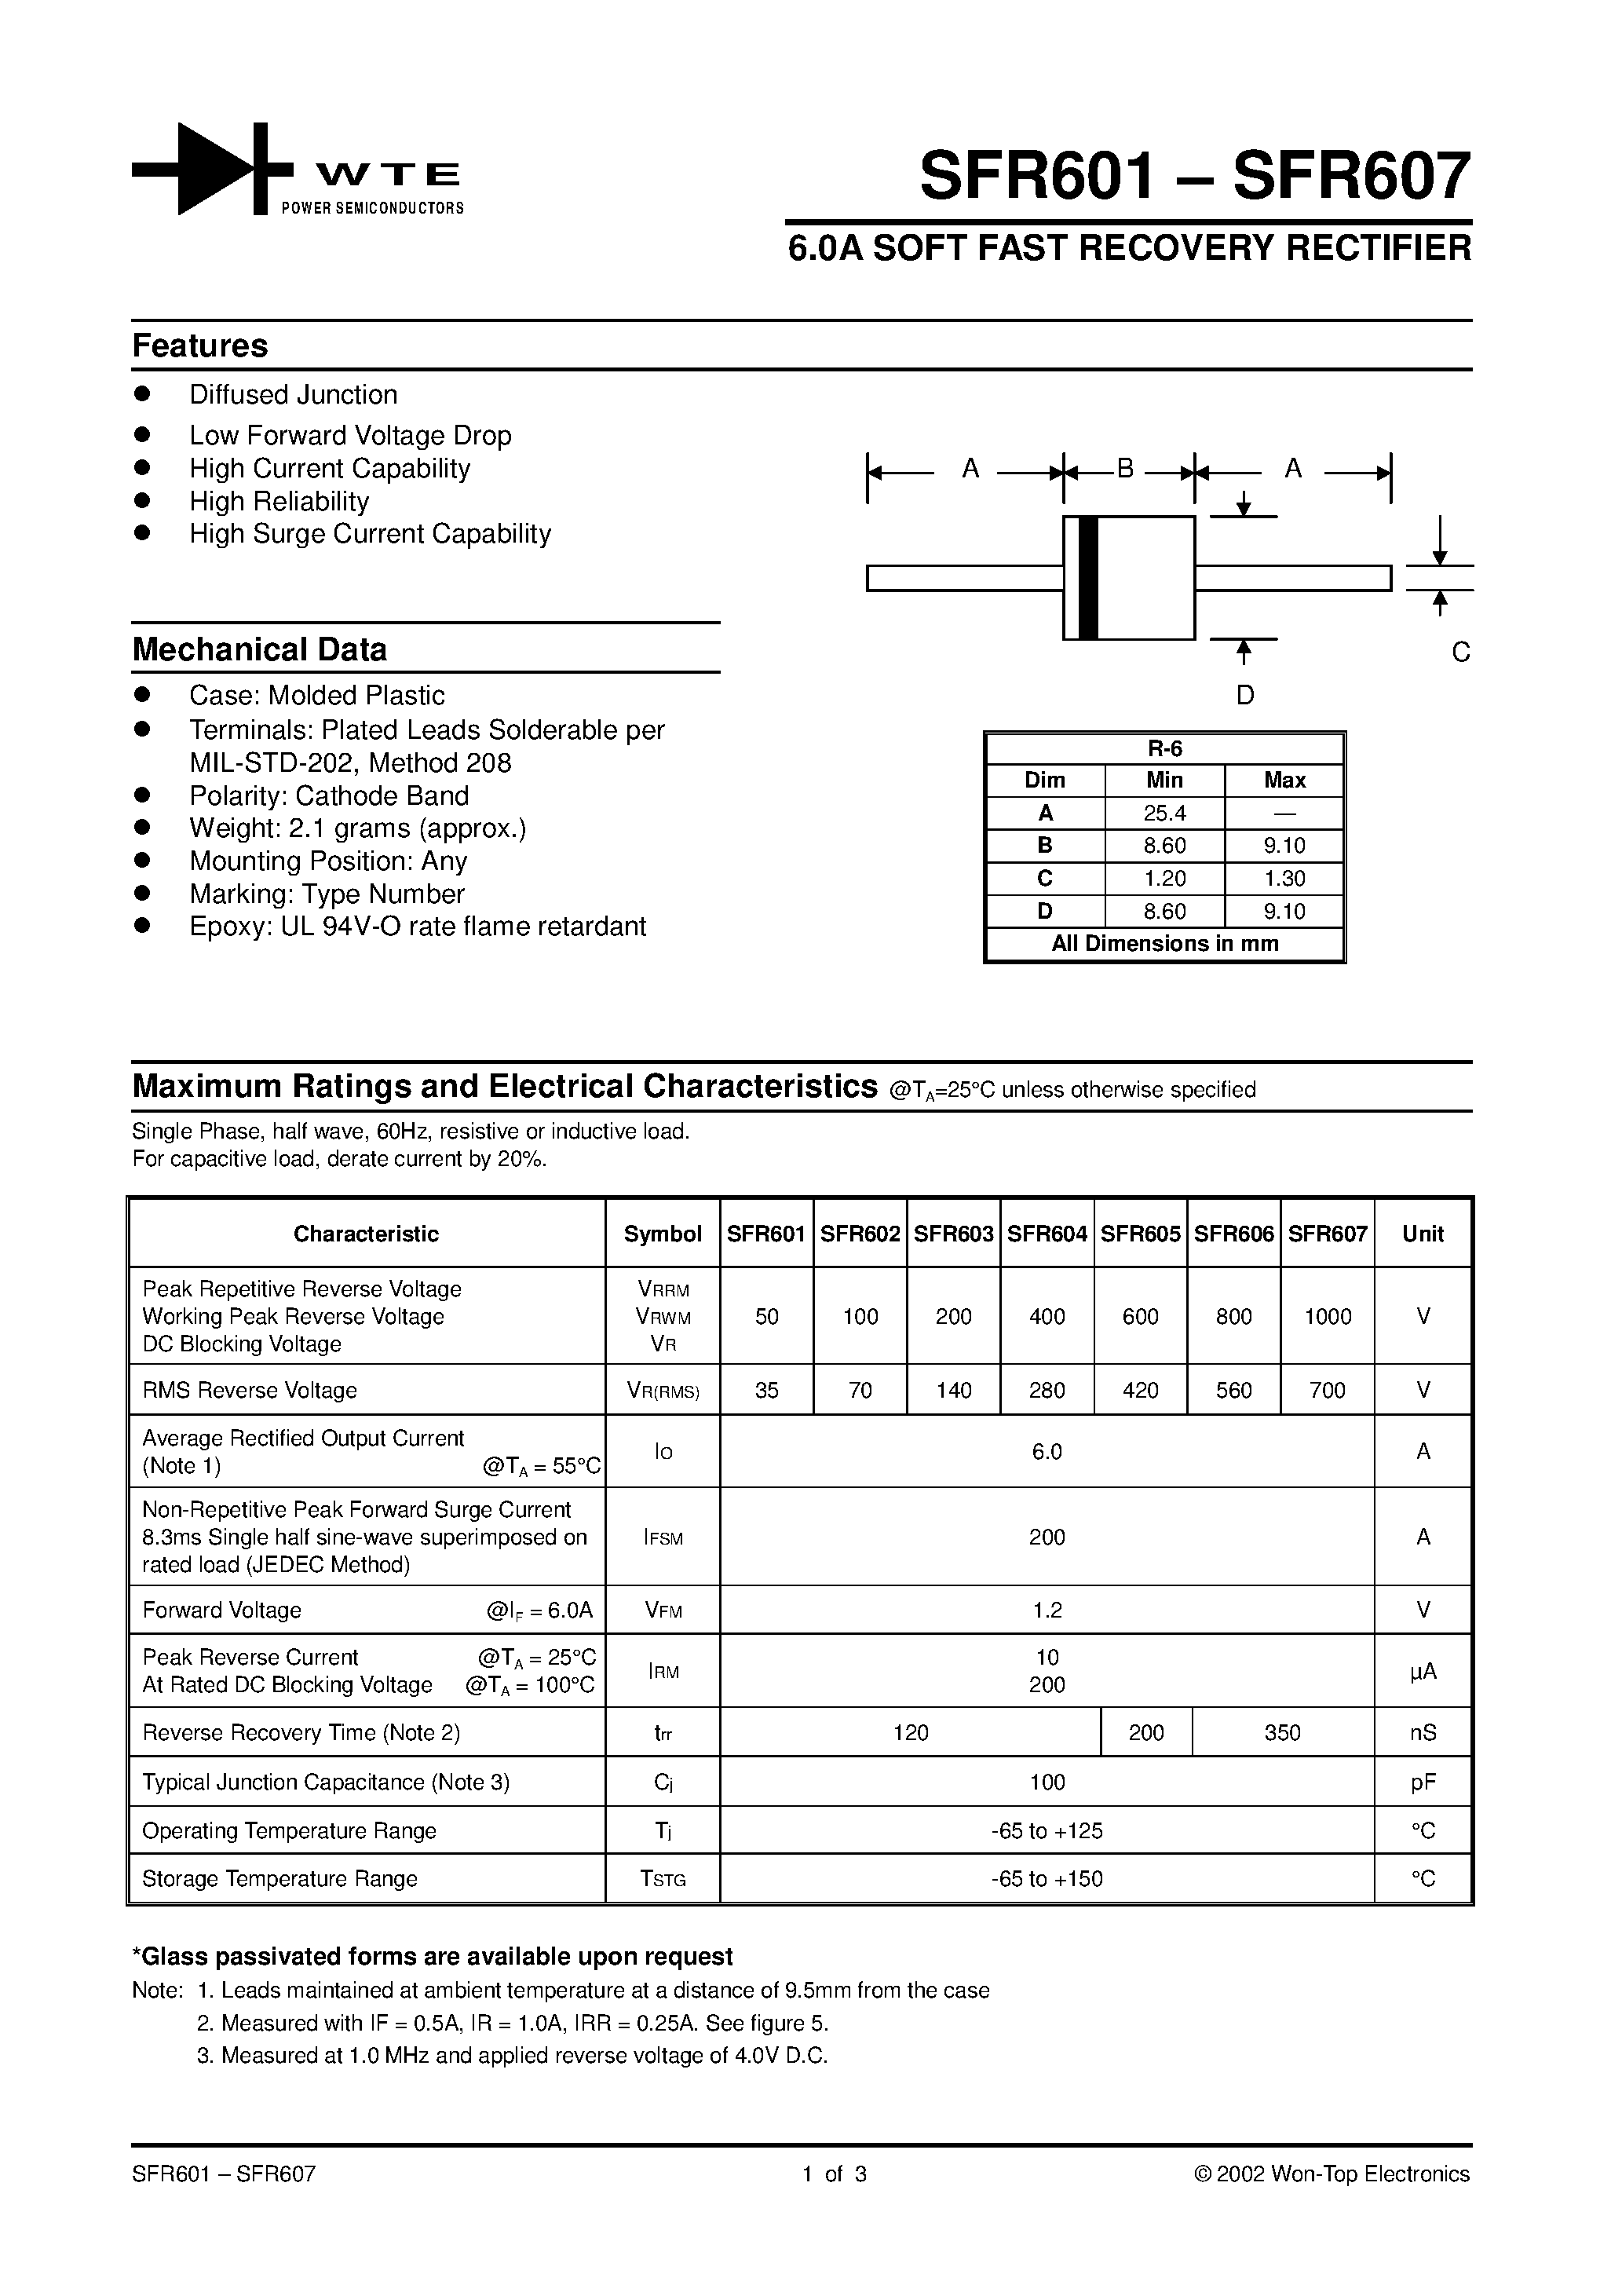 Datasheet SFR605 - 6.0A SOFT FAST RECOVERY RECTIFIER page 1